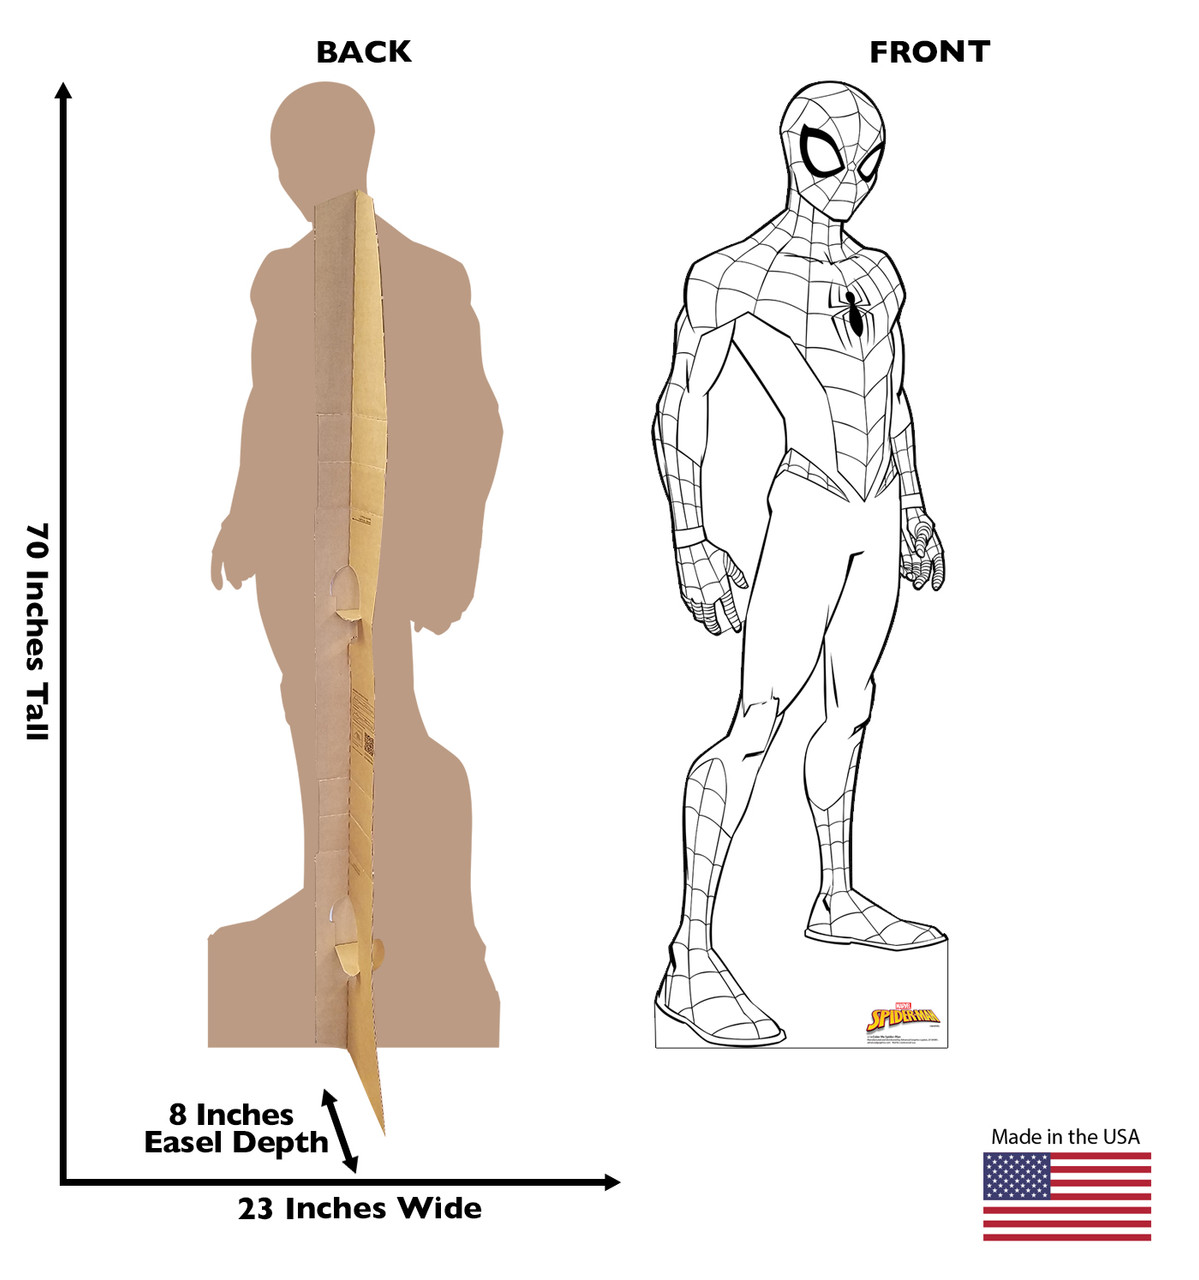 Life-size cardboard standee of Color Me Spider-Man from Marvel with front and back dimensions.